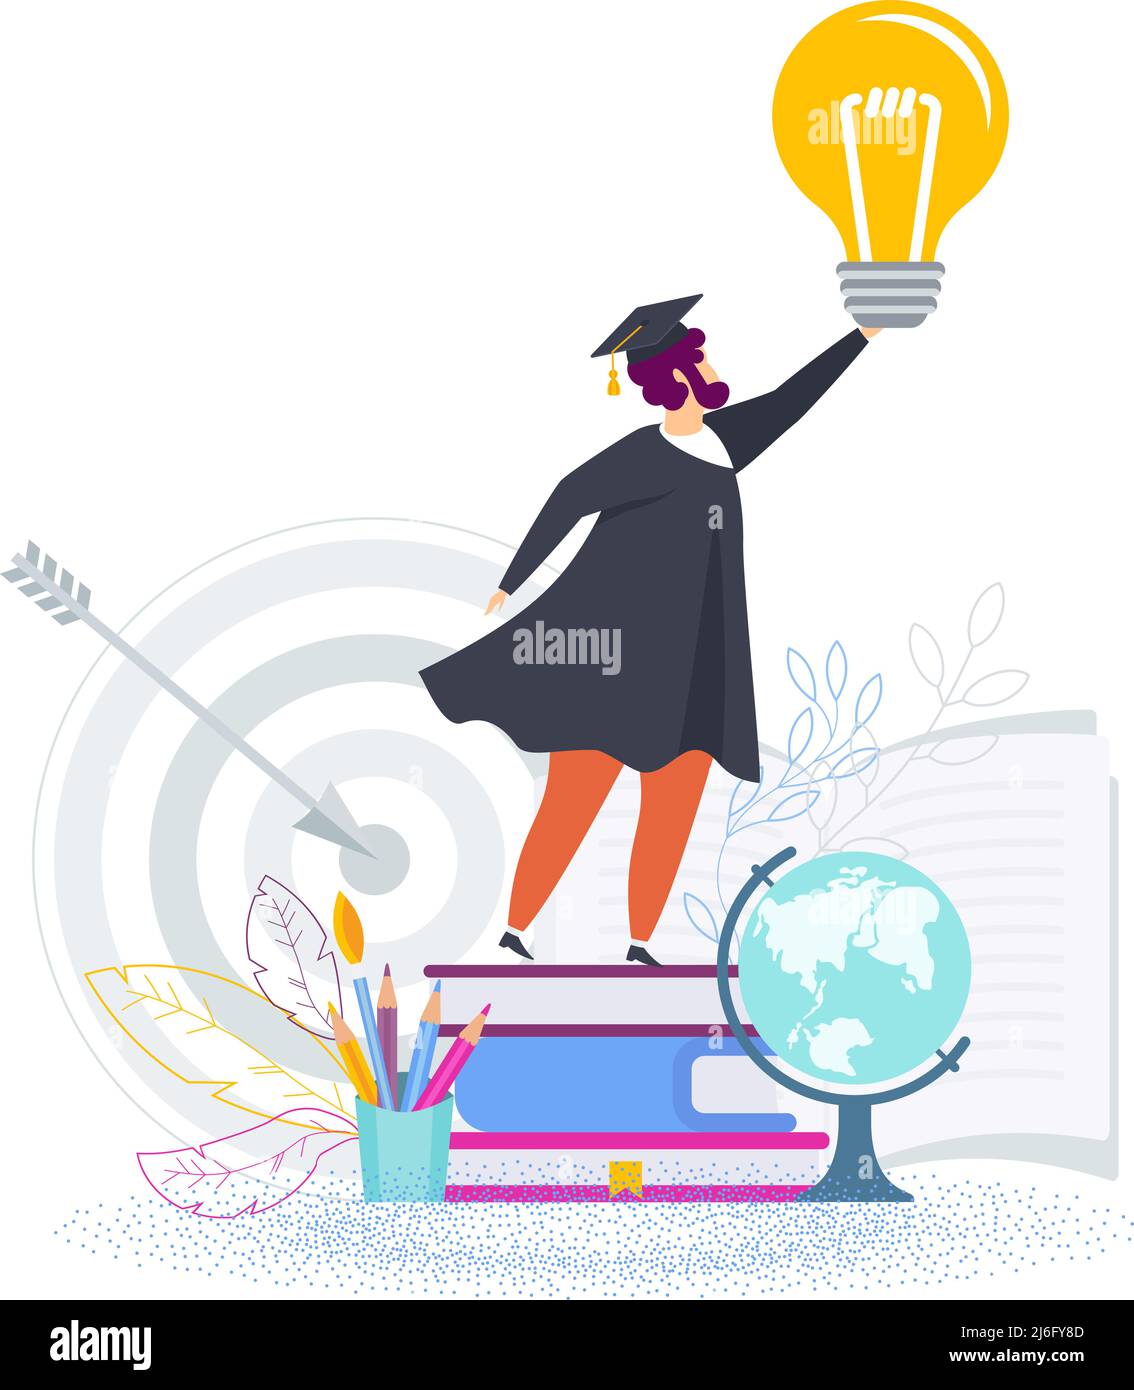 Graduate raises a glowing lamp in his hand. Graduation gown. Stock Vector